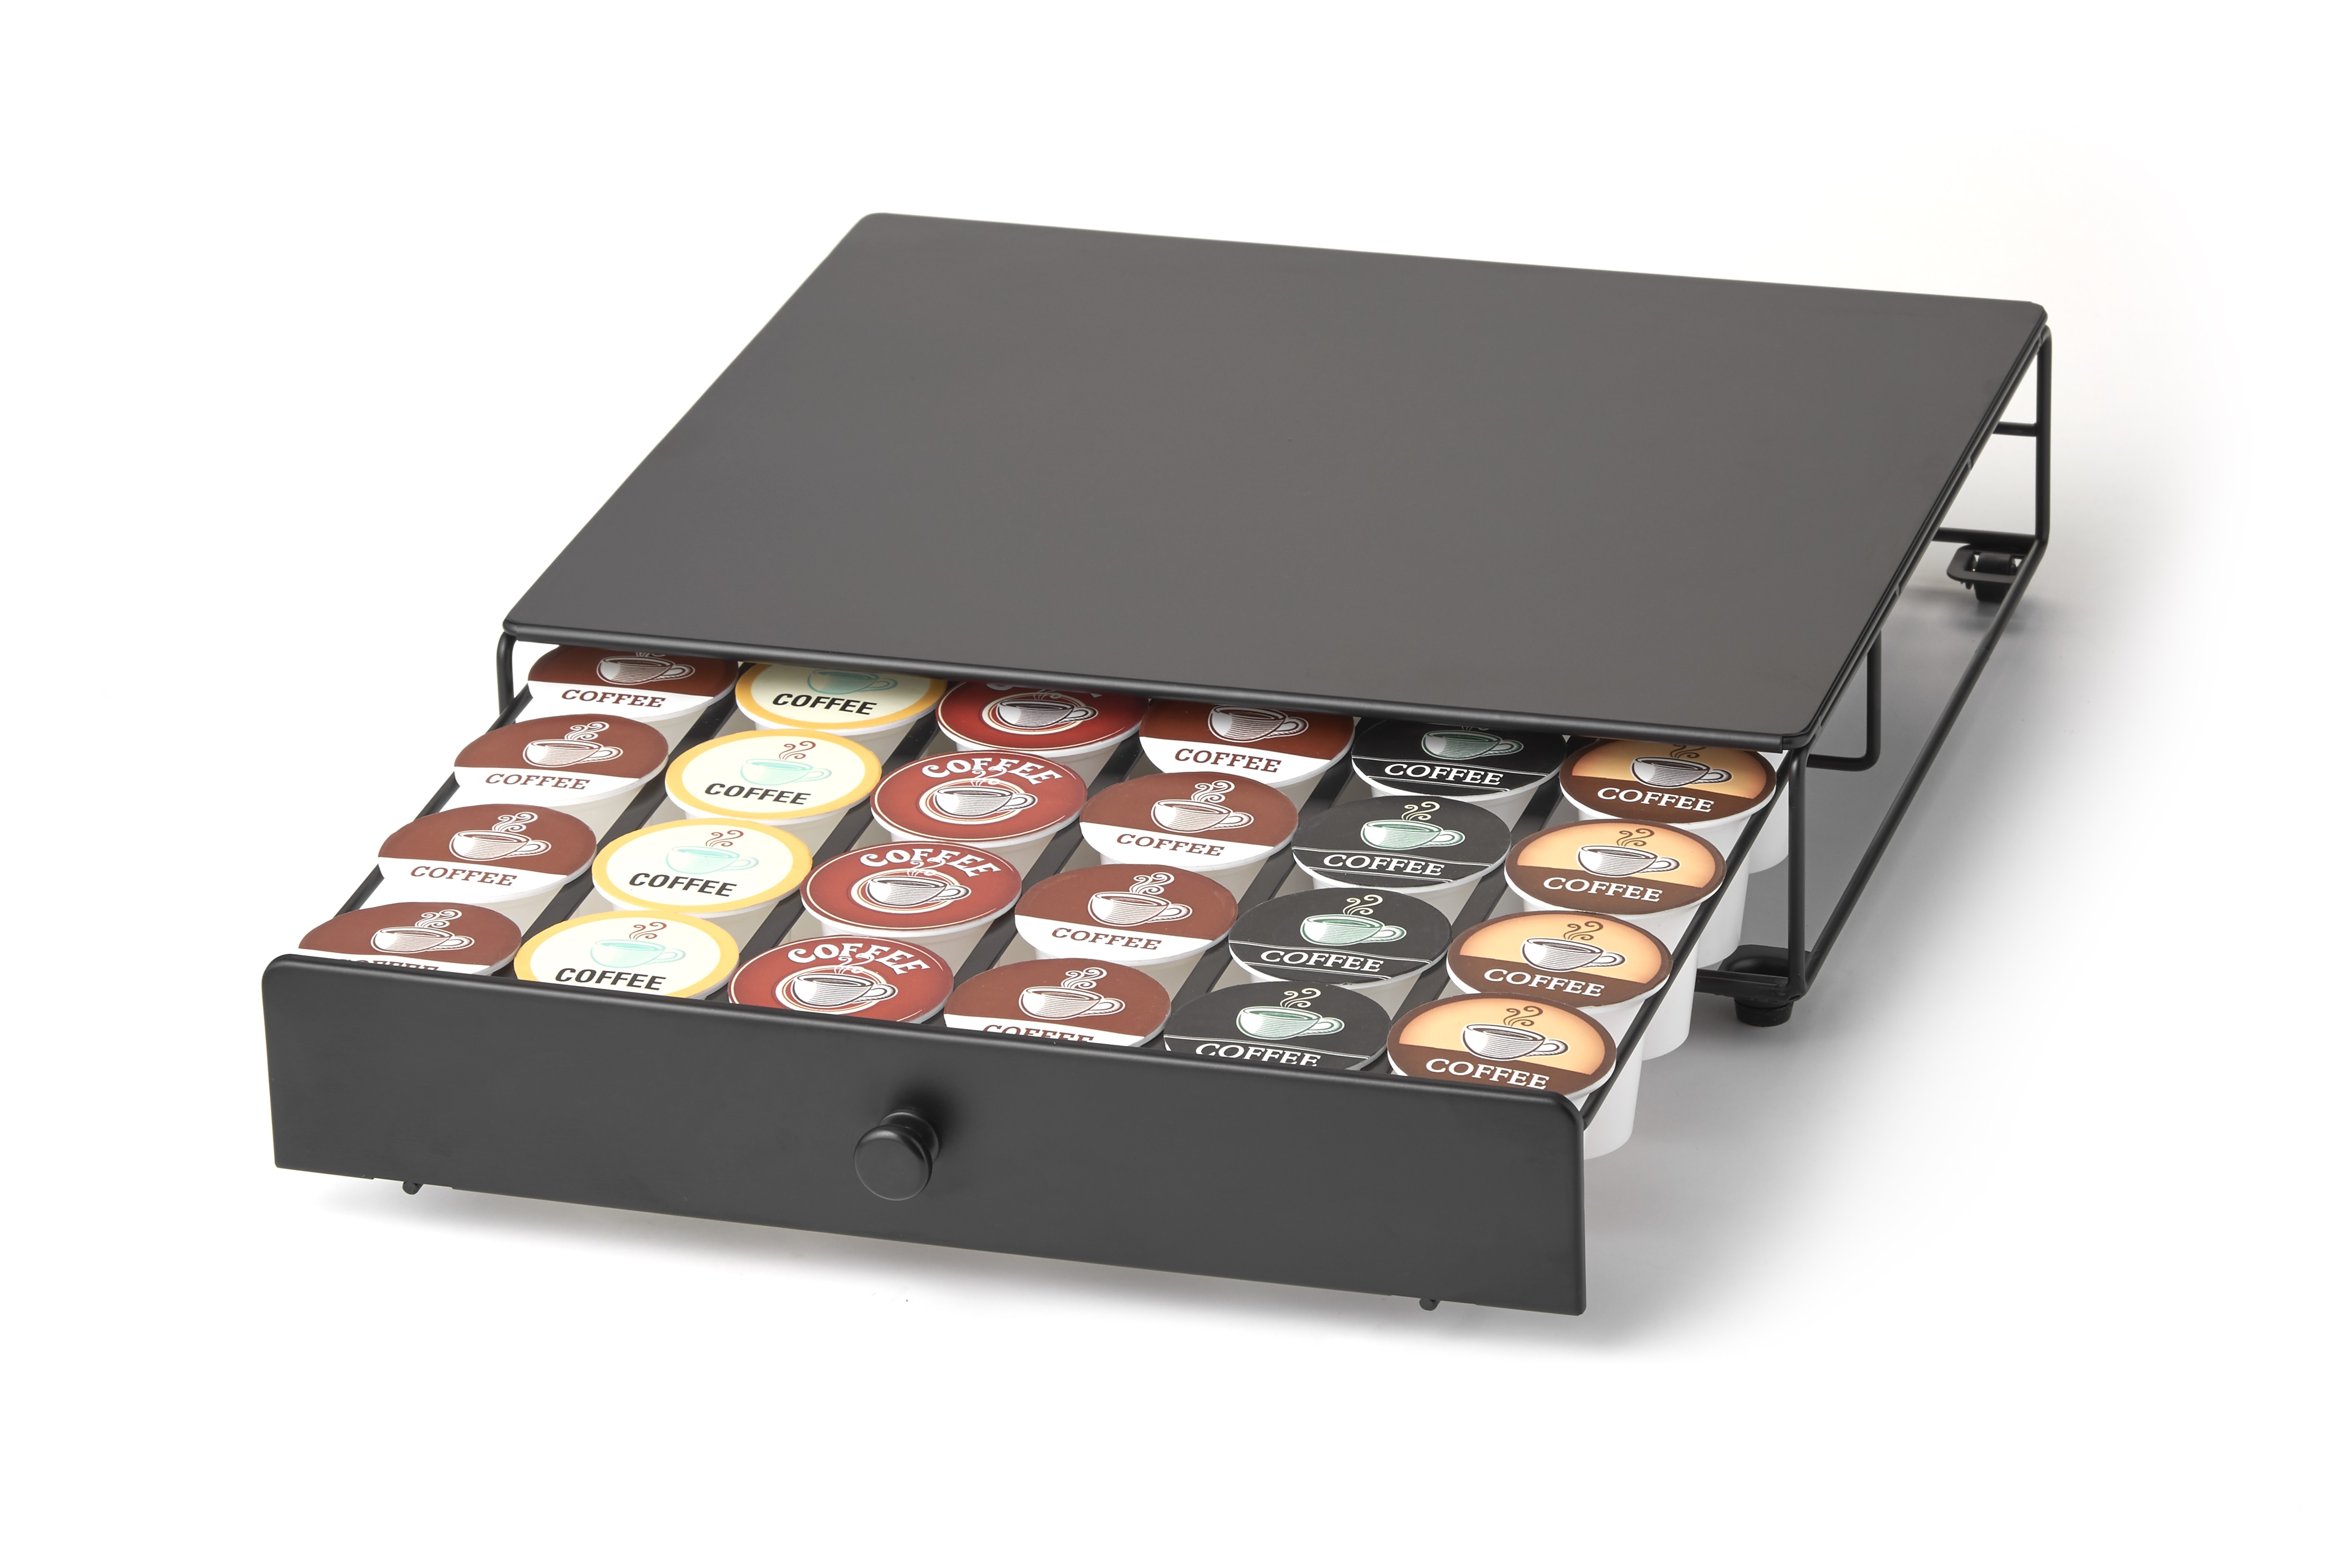 Nifty Solutions Rolling Coffee Pod Drawer – Compatible with K-Cups, 36 Pod Capacity, Black - image 1 of 5